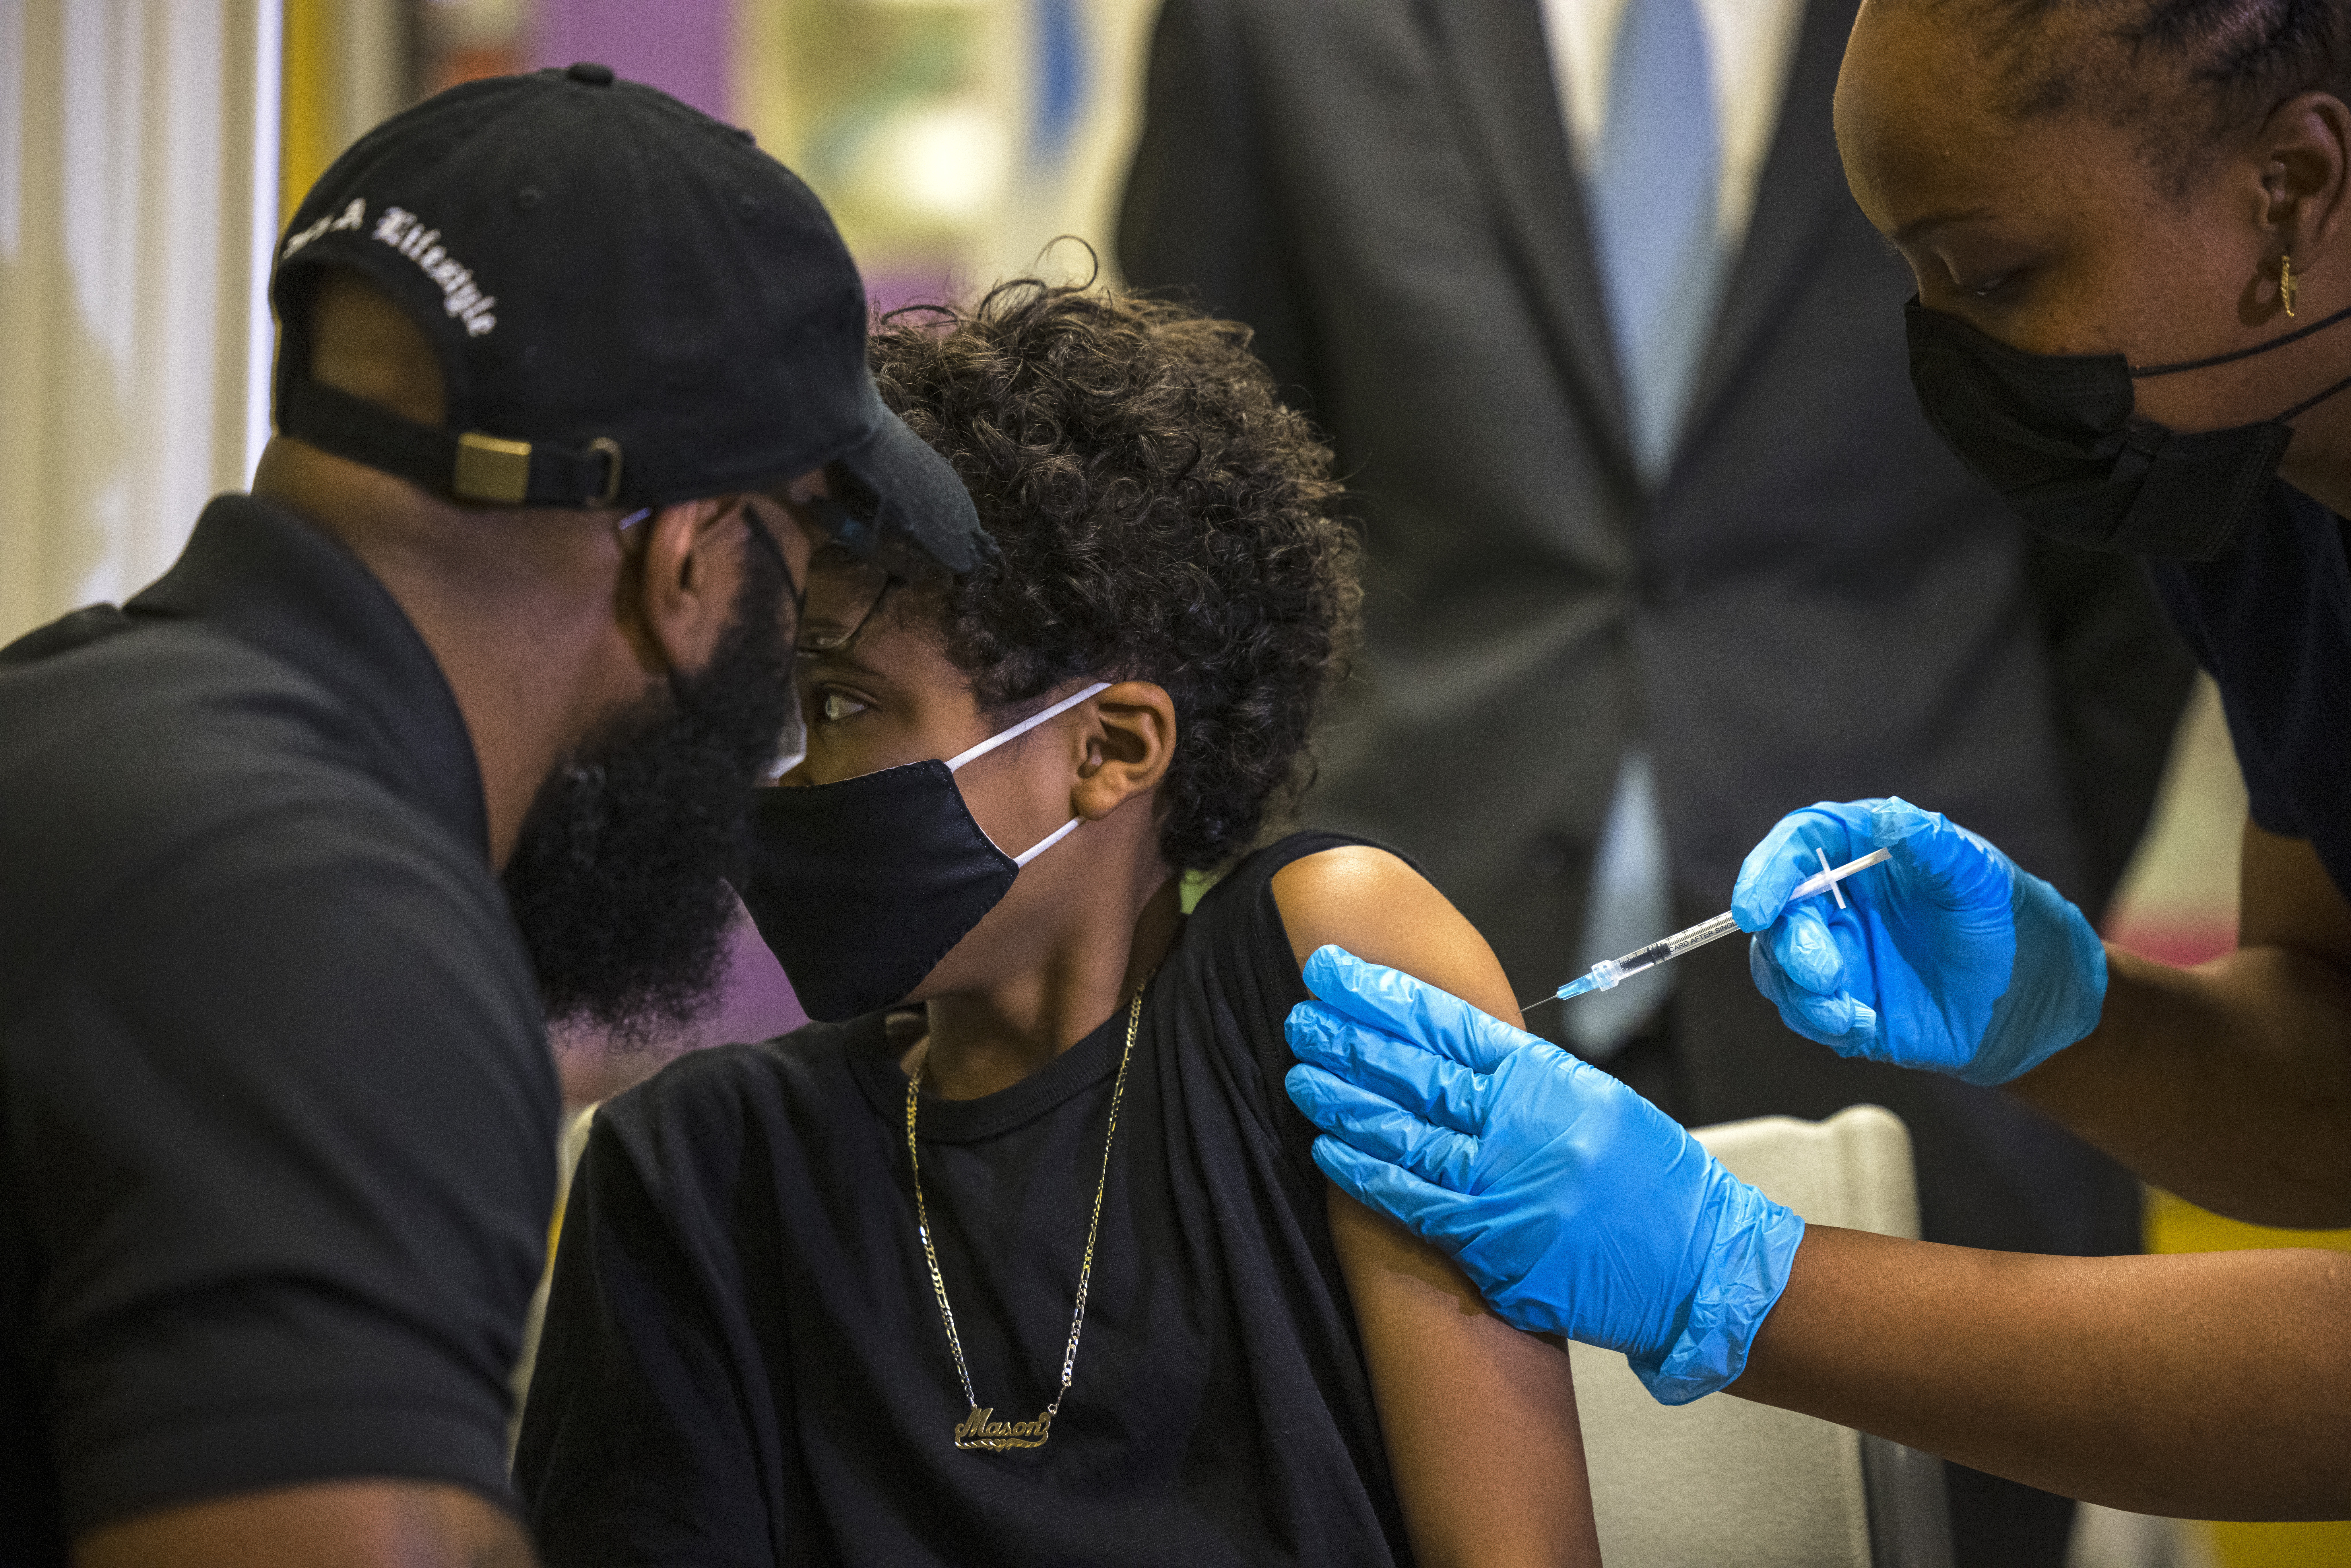 A boy receives a dose of a COVID vaccine from a medical professional wearing bright blue latex gloves. A man wearing a black shirt and hat sits in front of the child.